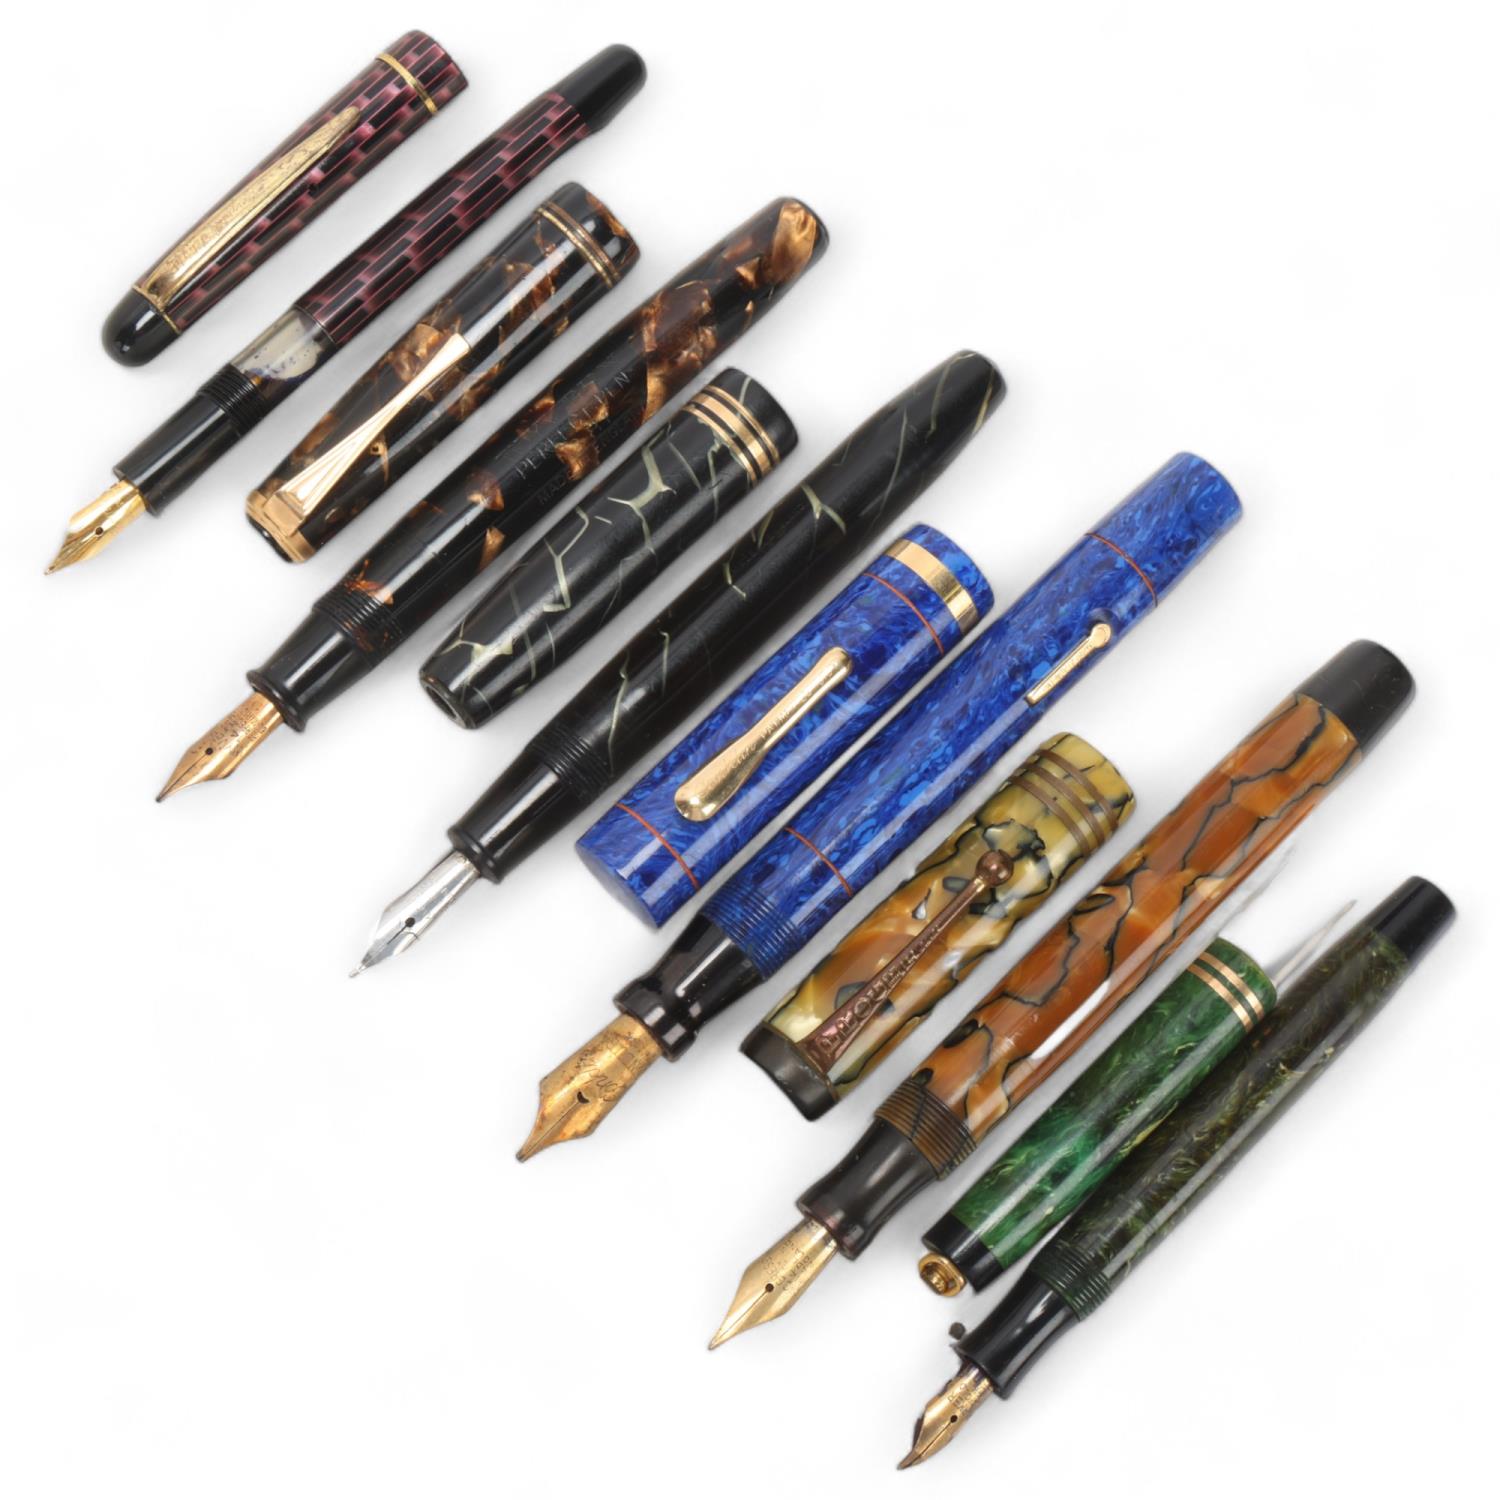 6 vintage fountain pens, including Conway Stewart 58, Parker Duofold, Progress, Wyvern Perfect No